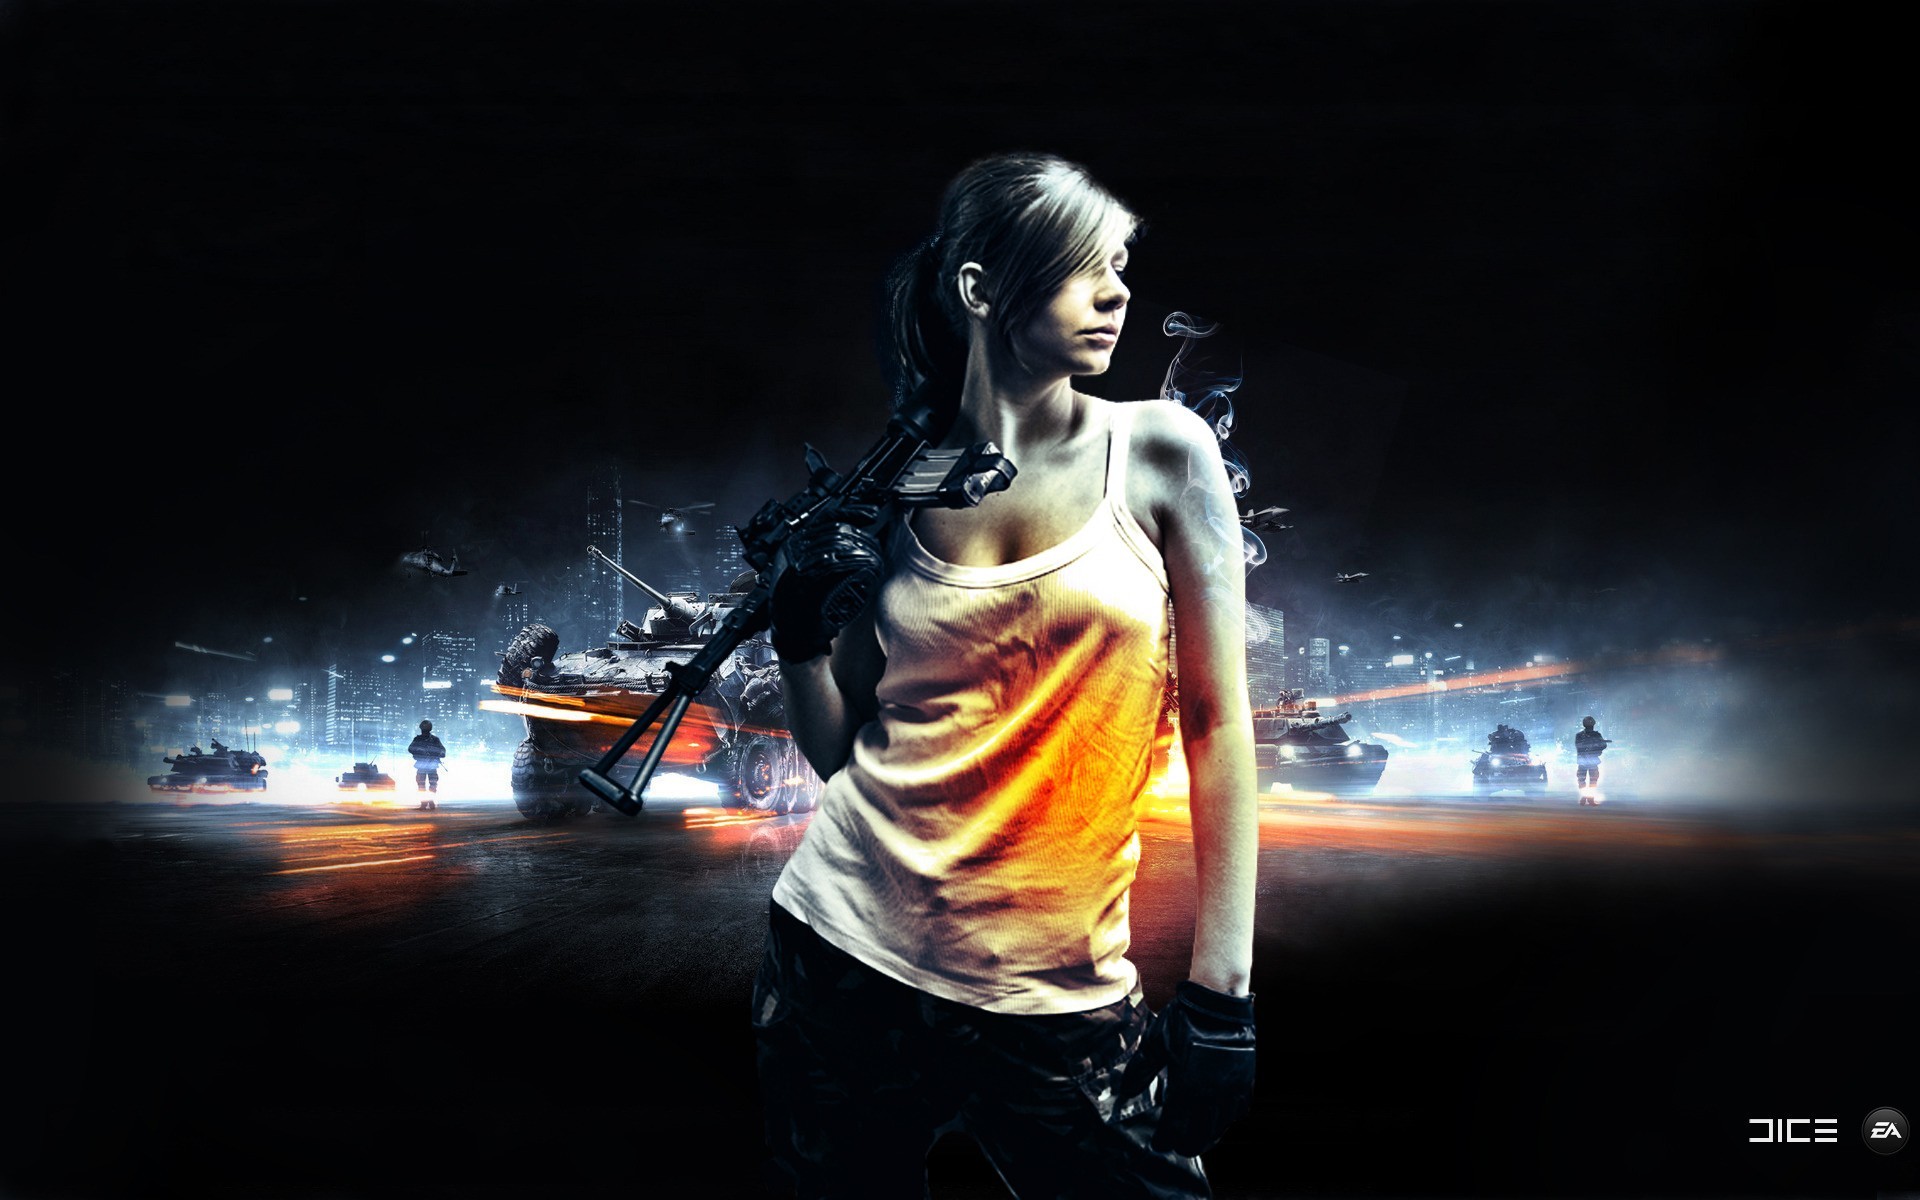 1920x1200 Battlefield 3 HD Wallpapers Free Download - Unique FHDQ Wallpapers